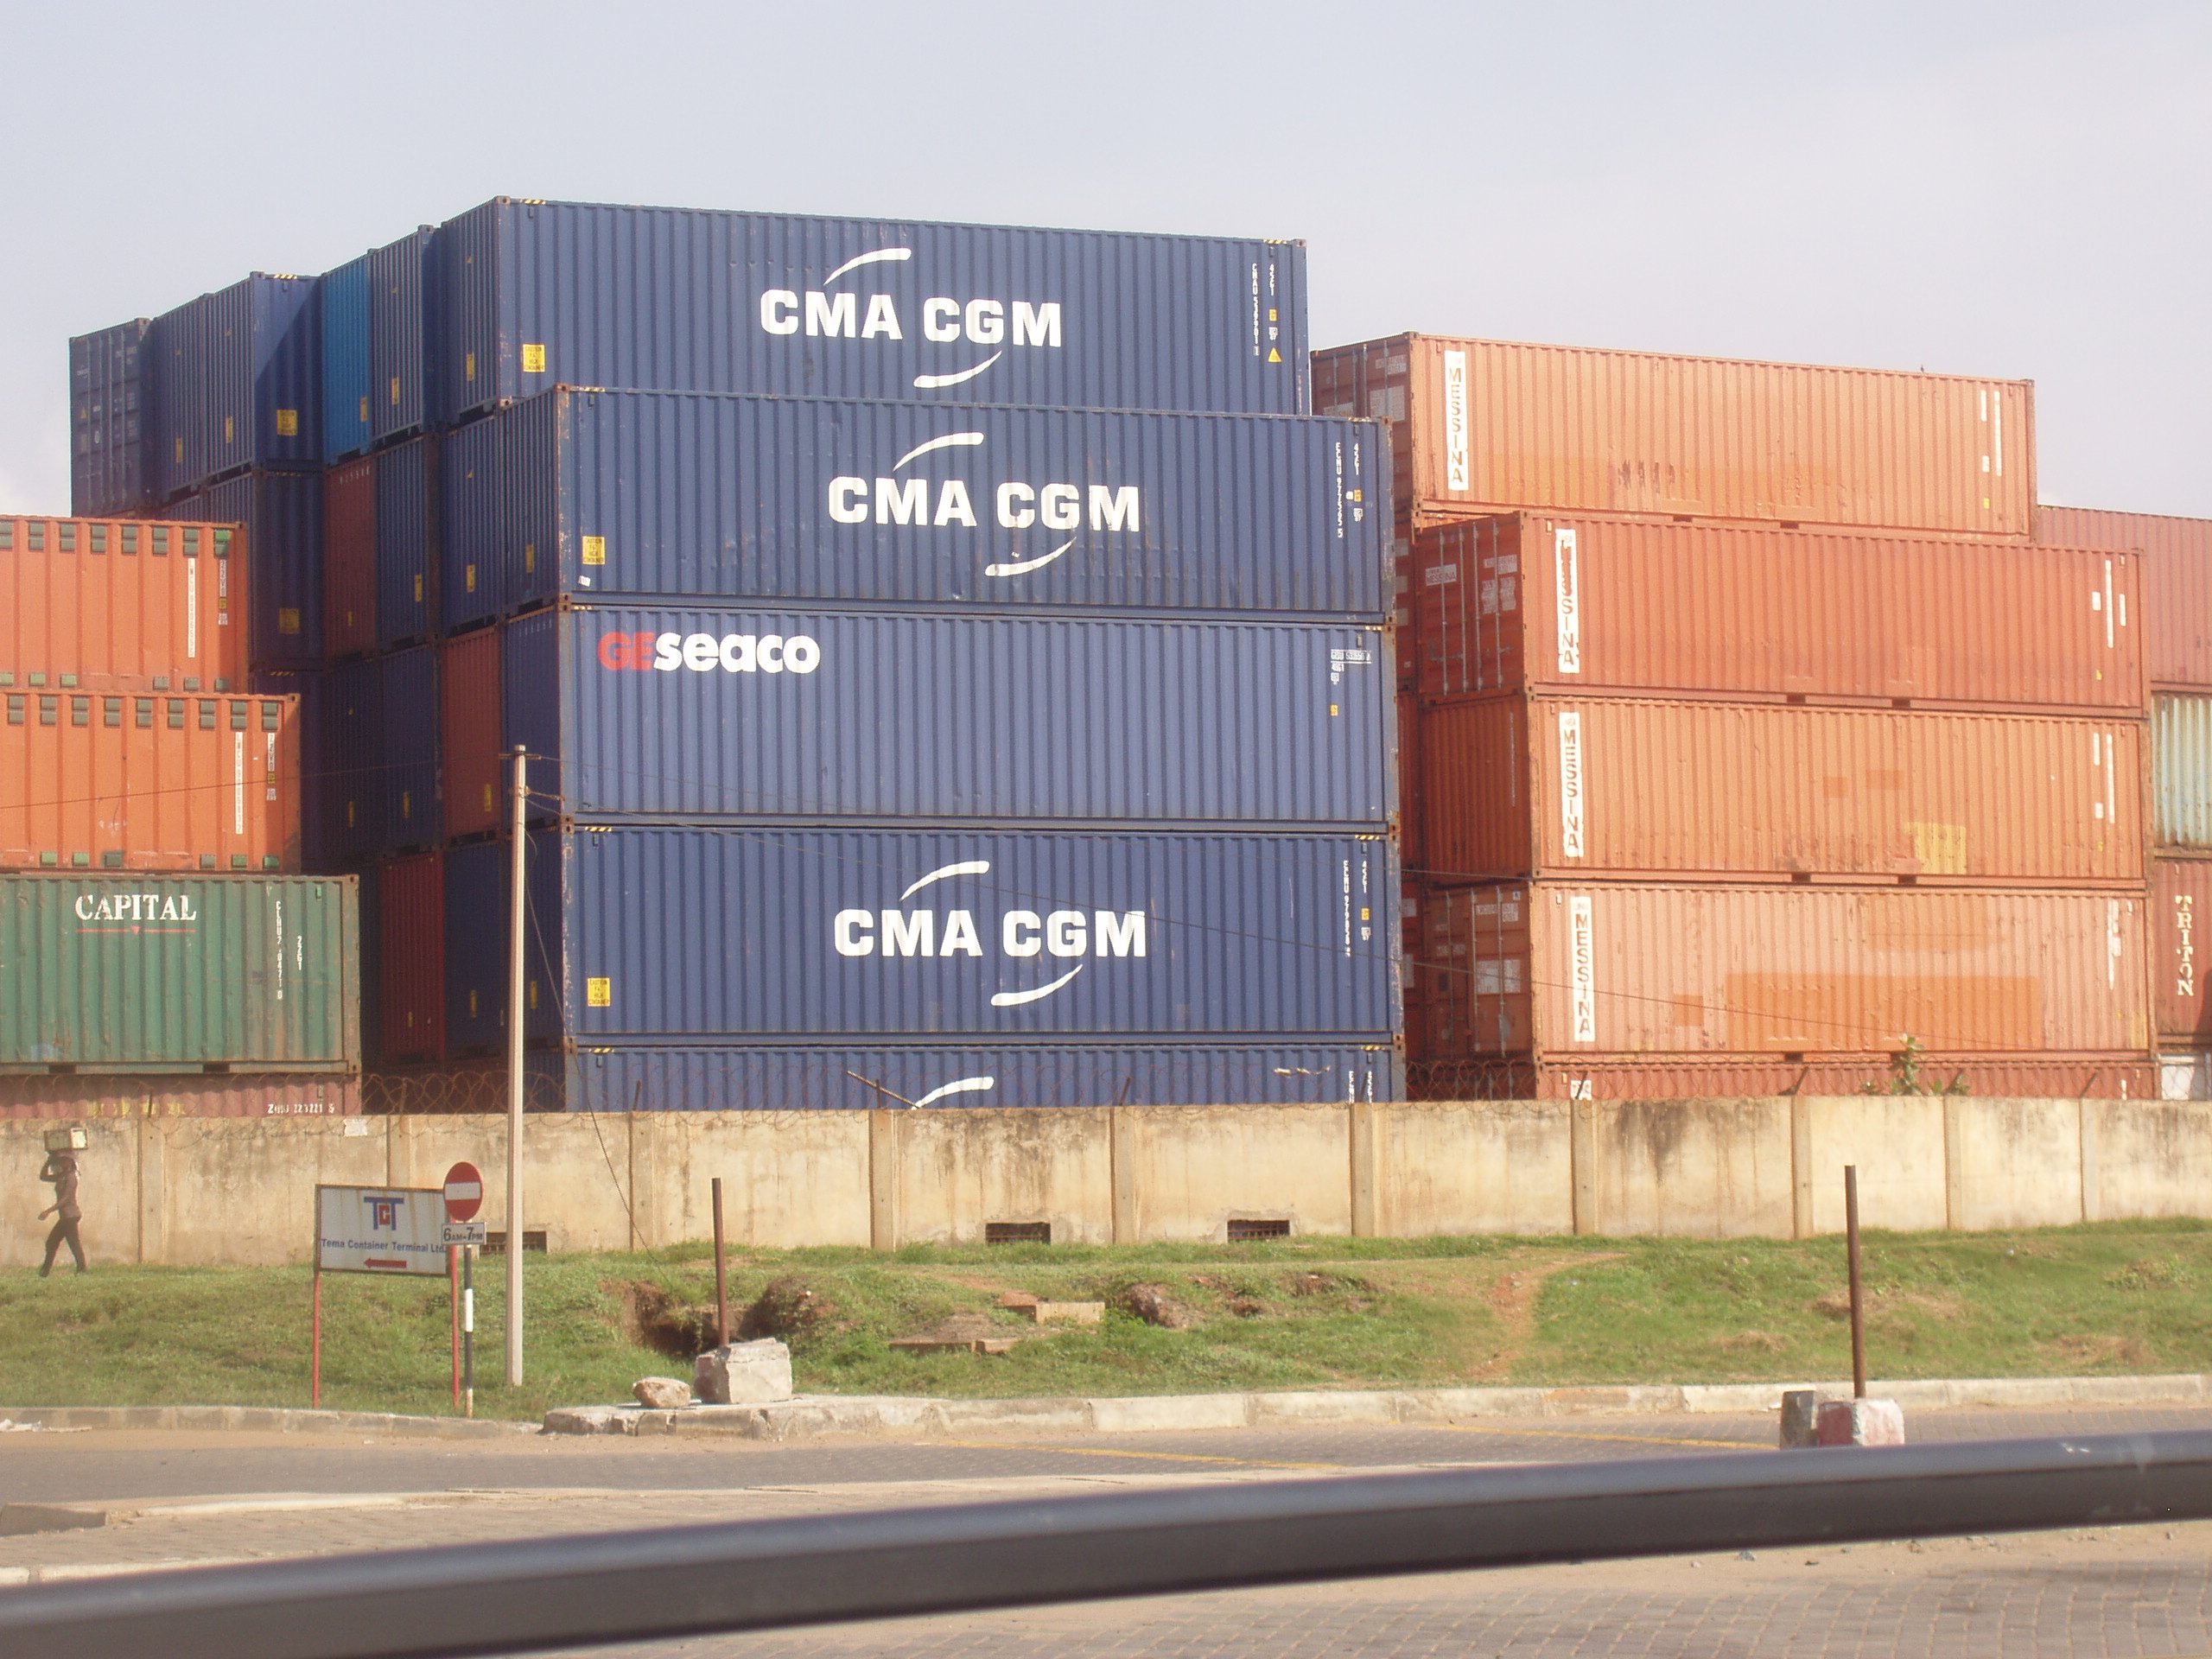 CCM Ghana threatens demo June 25 over uncleared medical supplies at port